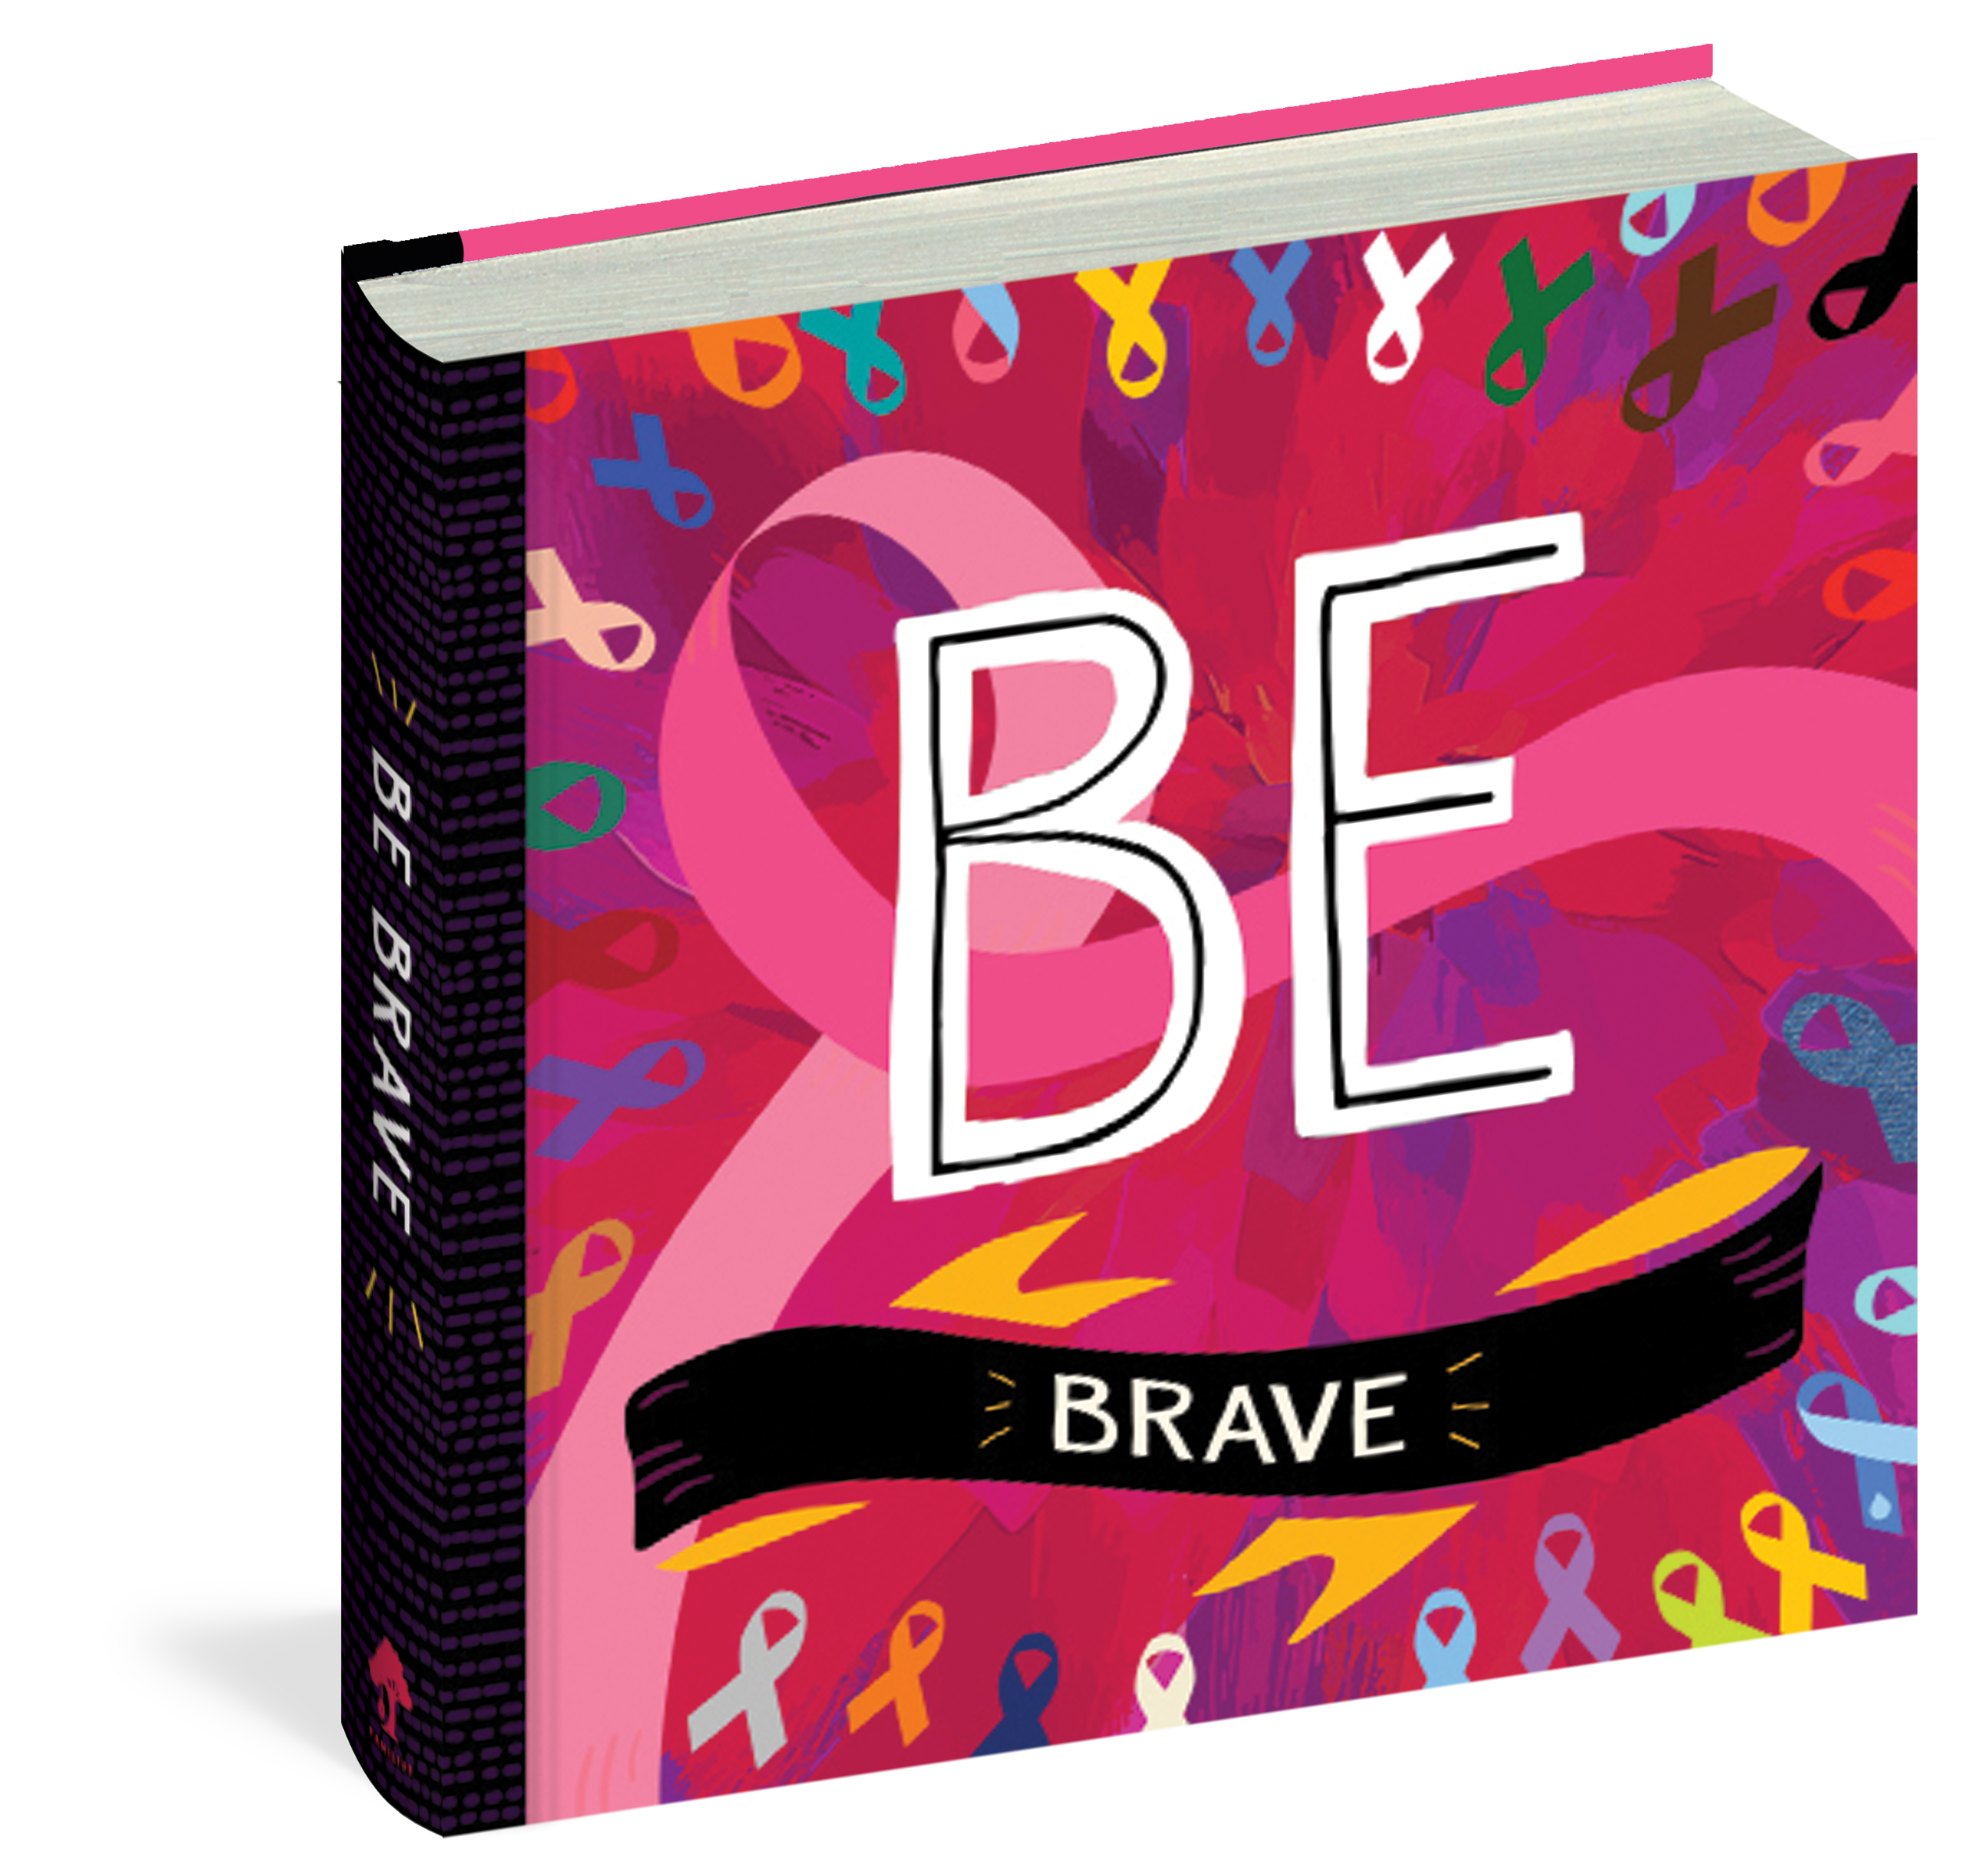 The cover of the book Be Brave.